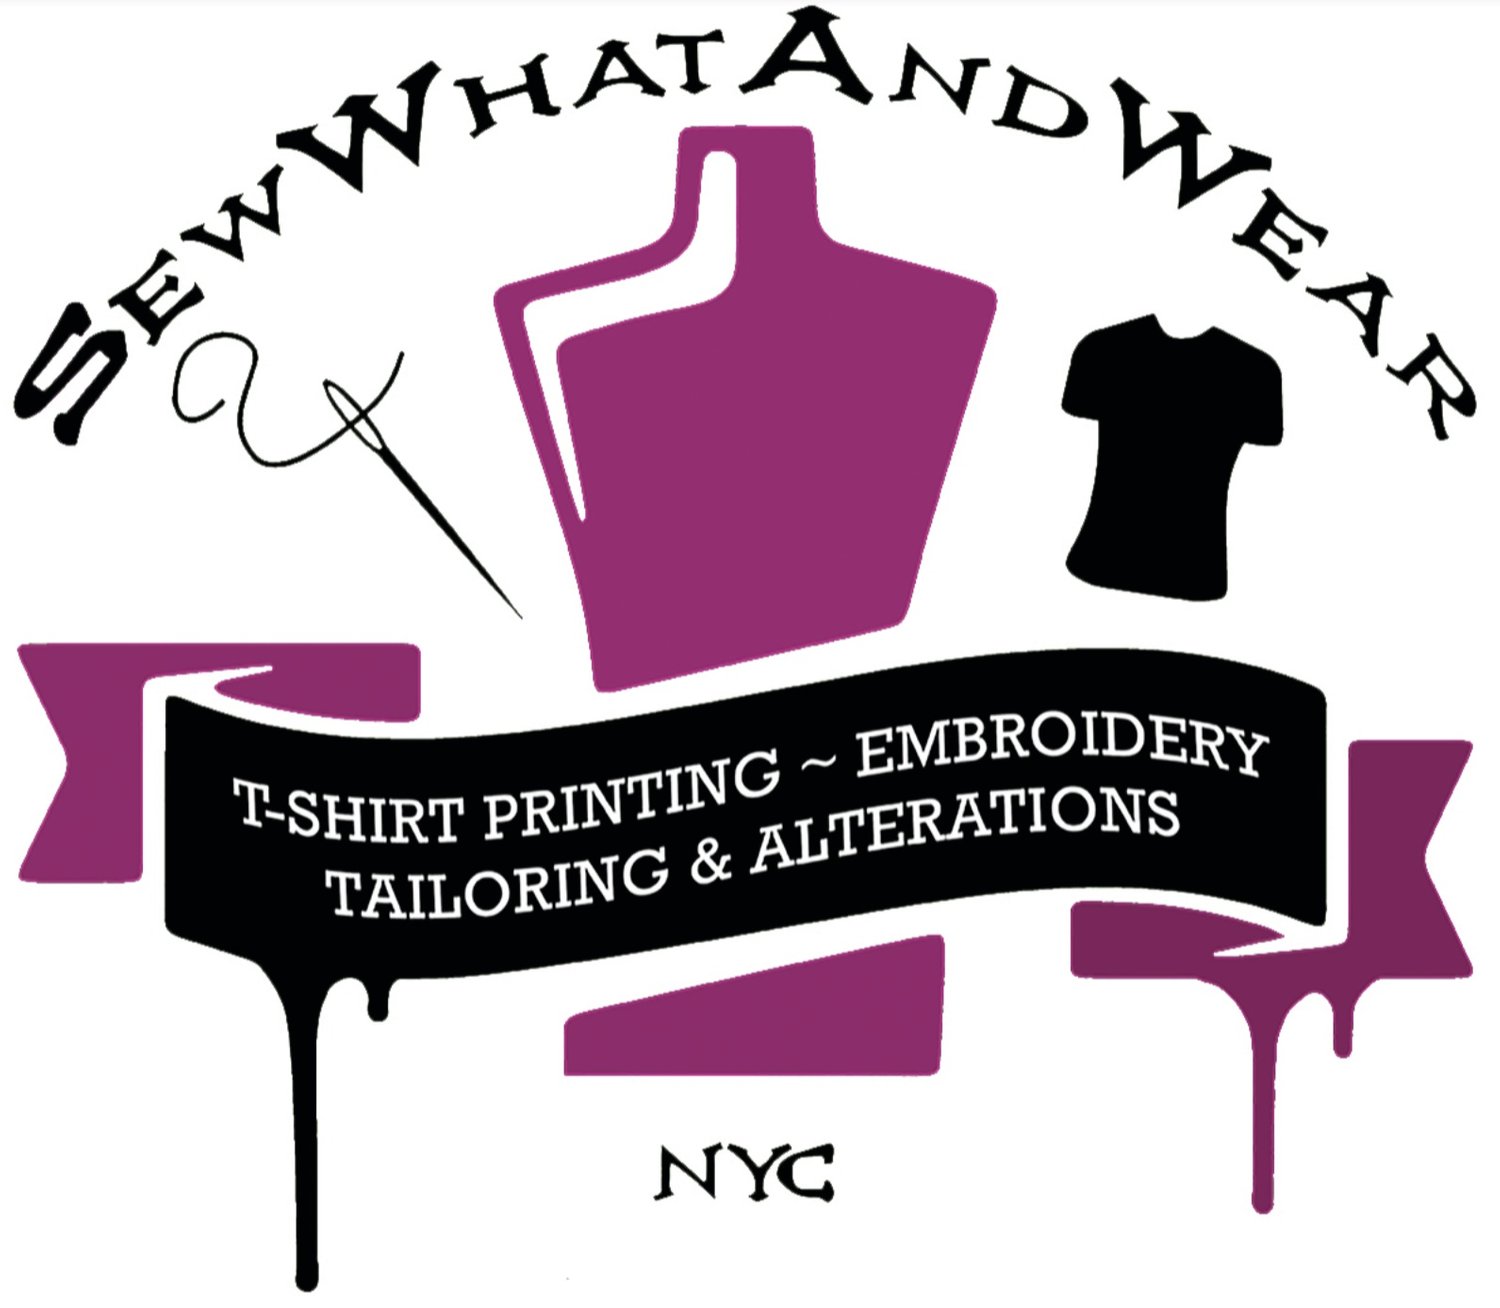 Sew What and Wear